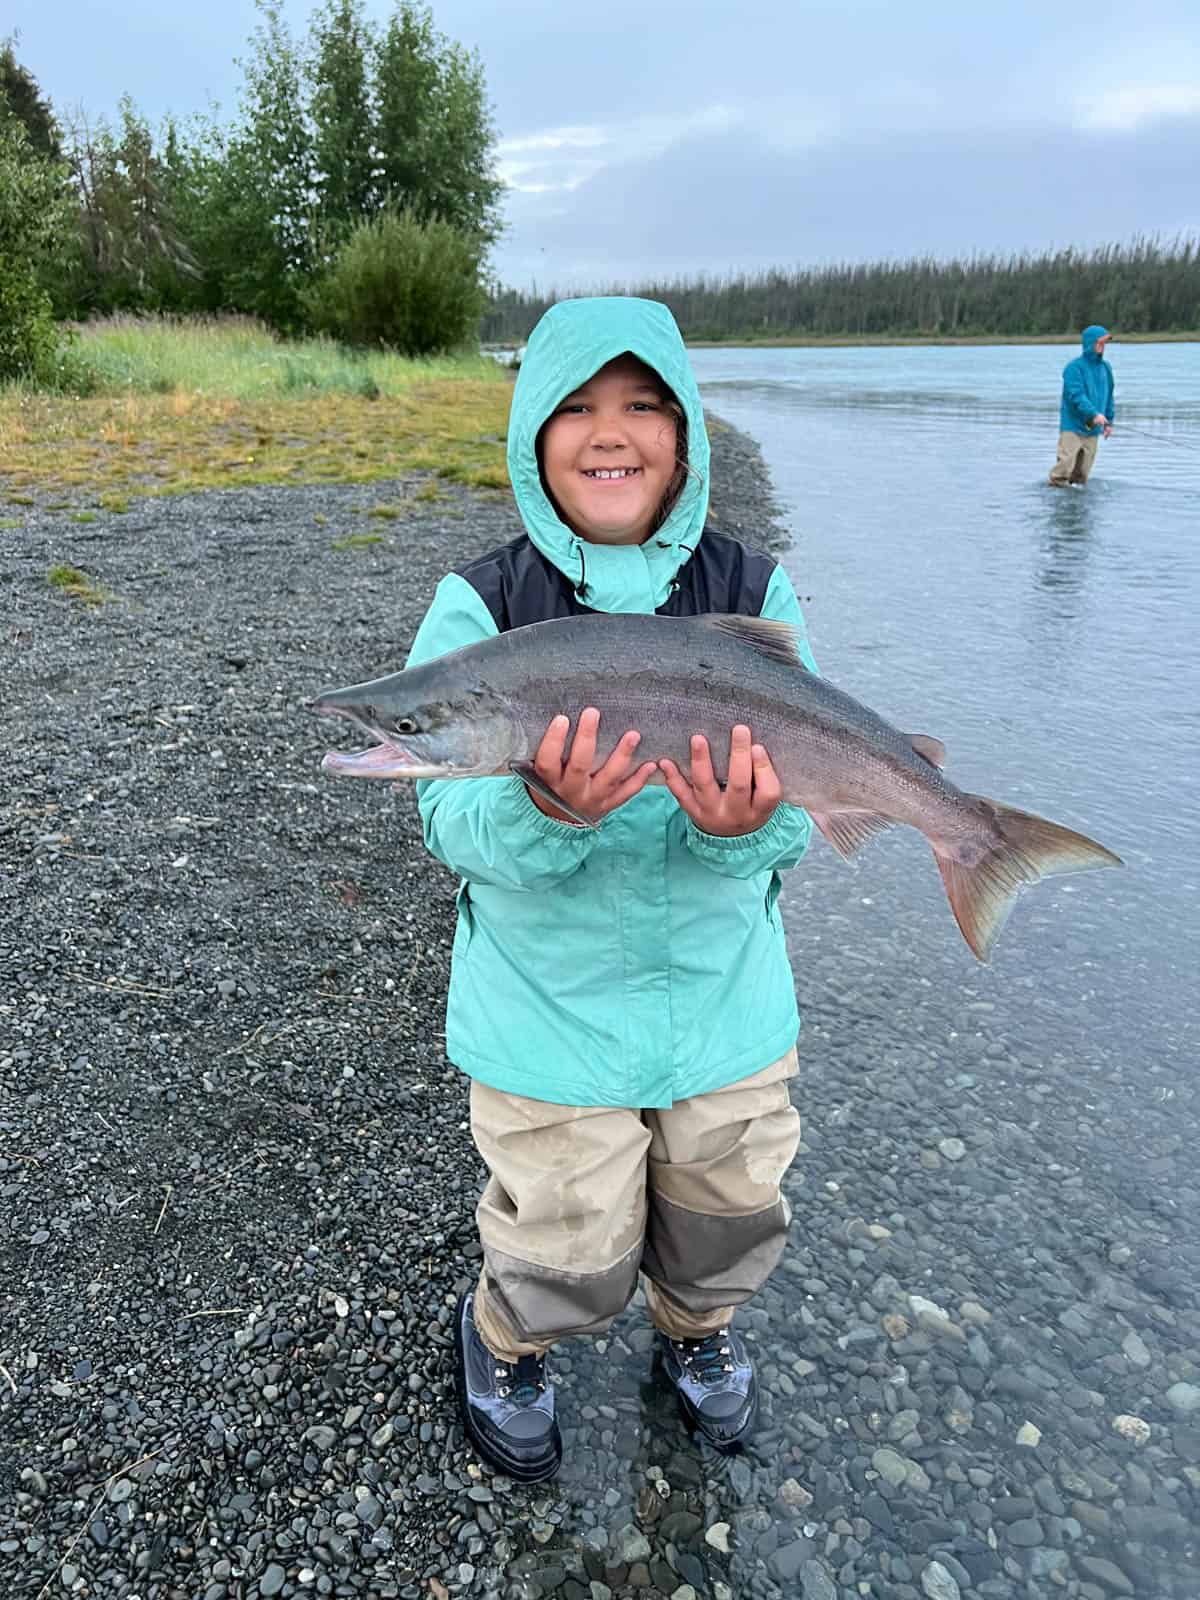 A picture of a girl holding a fish she caught on the Kenai river in Alaska.